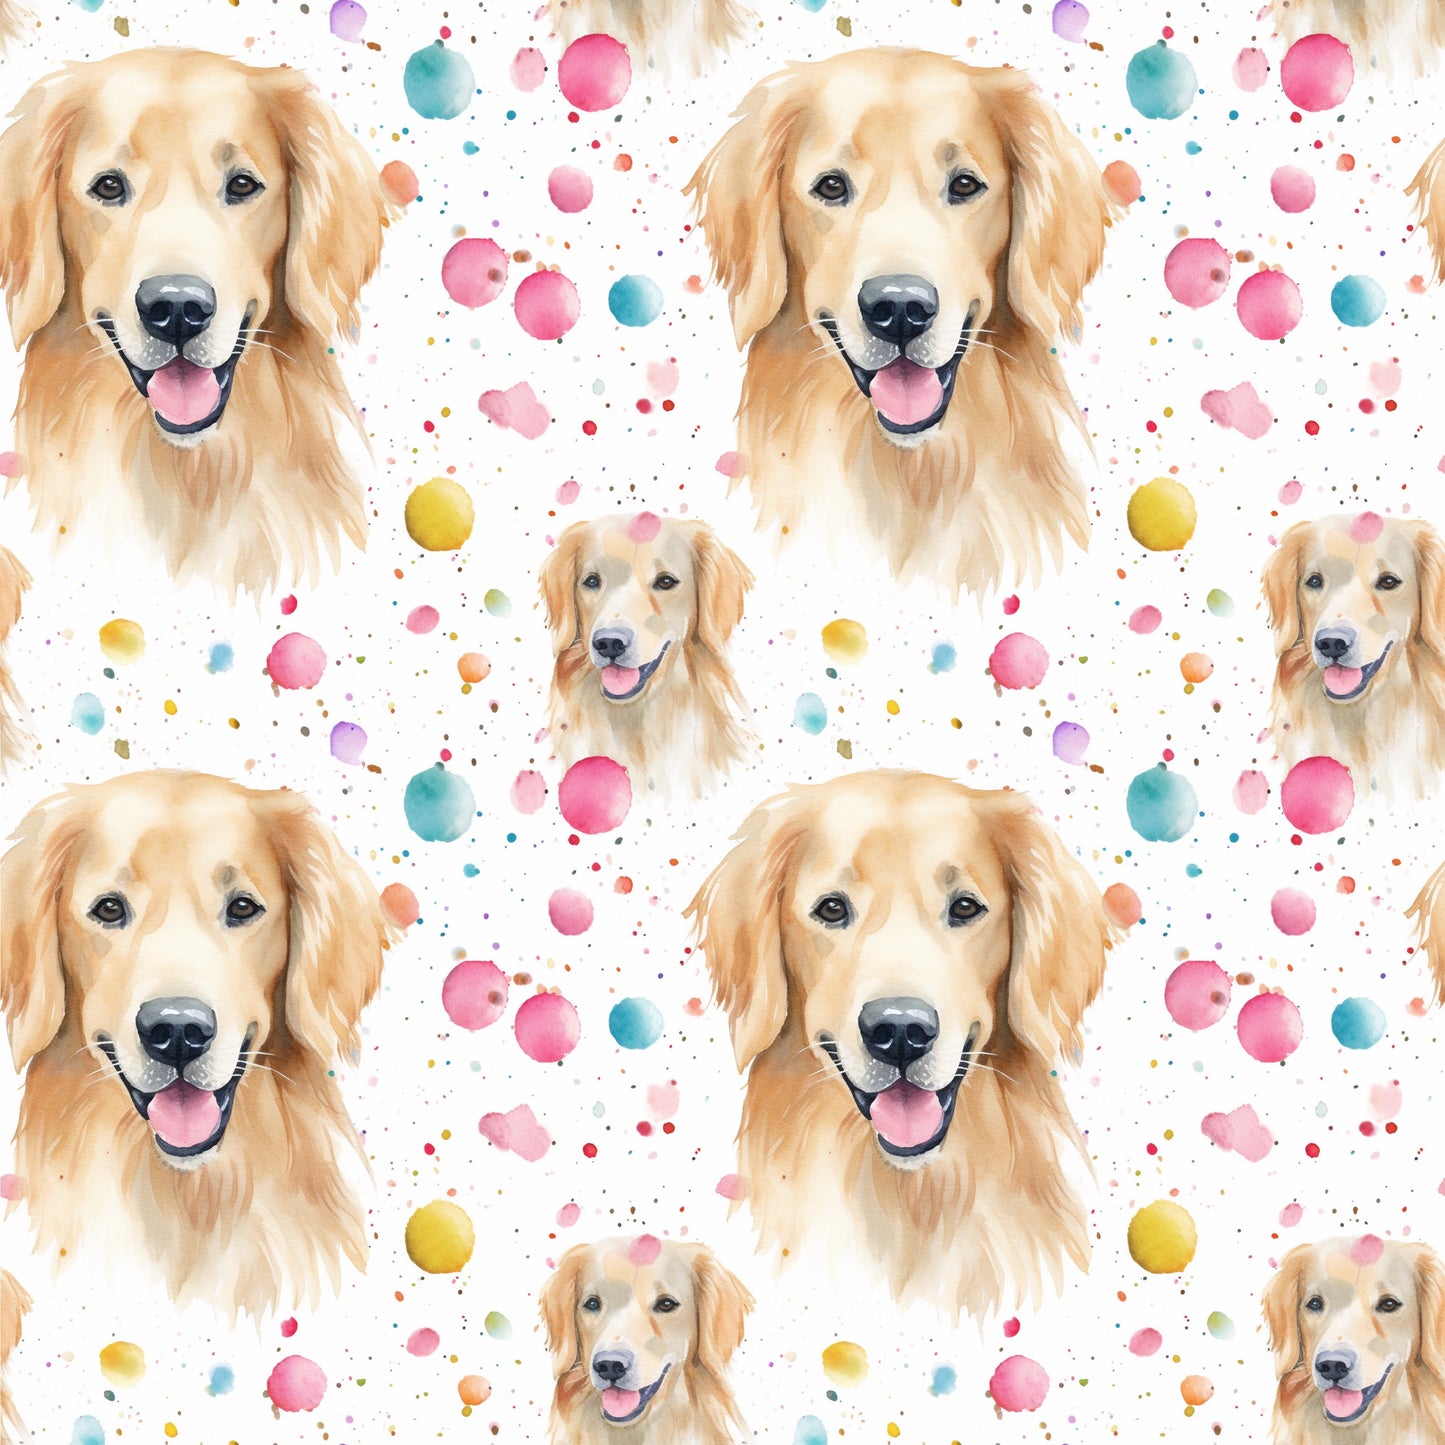 Golden Retriever Dog (Faux Leather - 8" x 13" Printed Sheet)